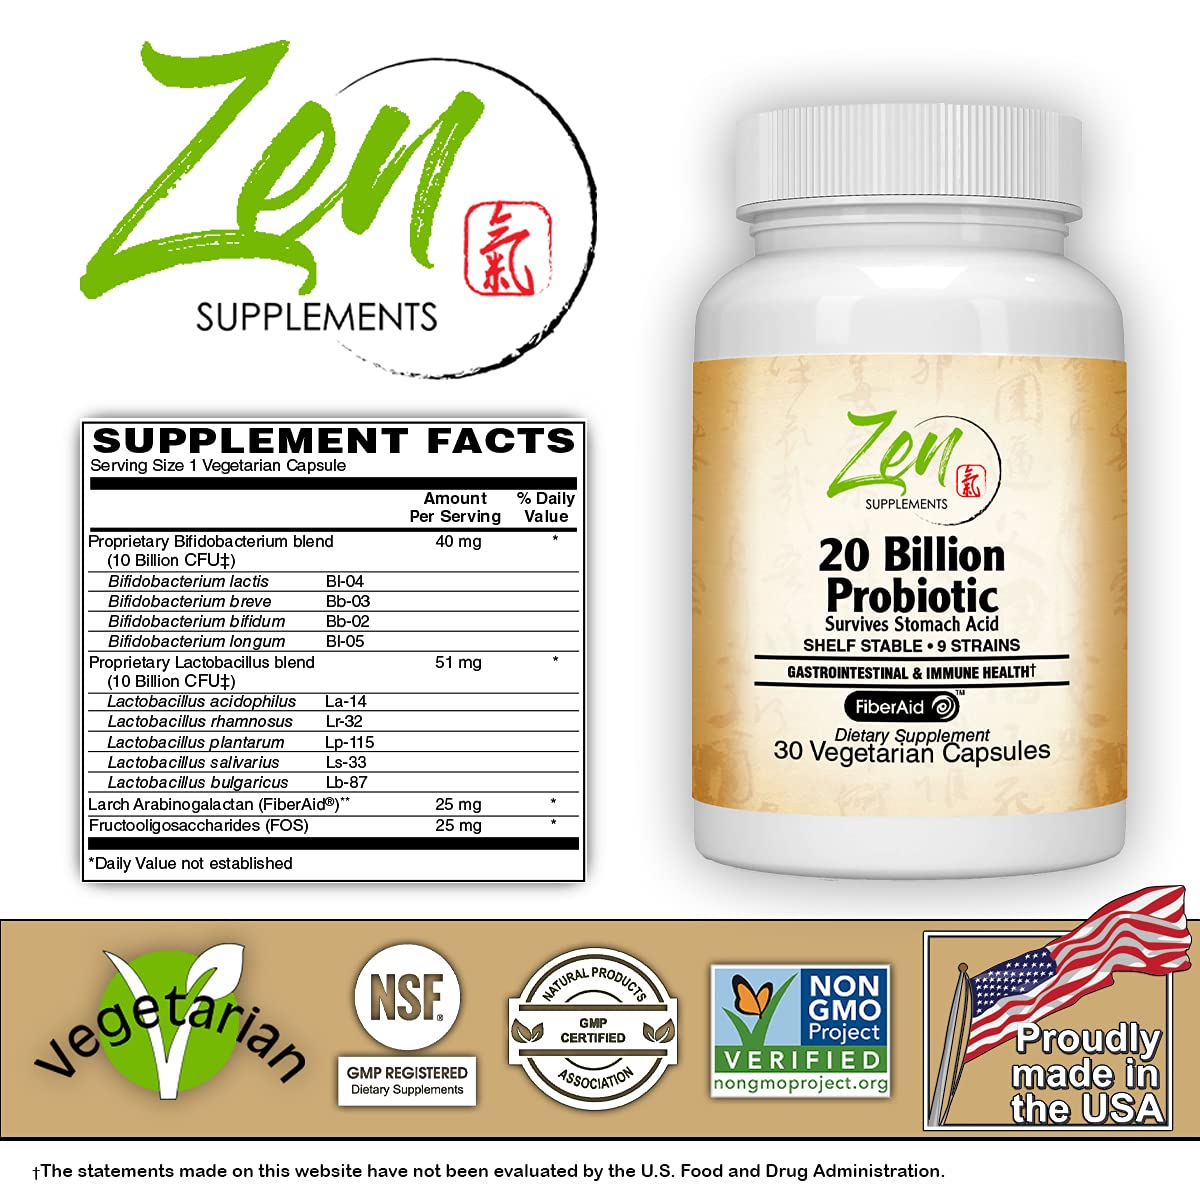 Multi-Probiotic 20 Billion CFU 9 Strain, 30-Vegcaps -Sustained Release Technology, Resist Stomach Acid, Shelf Stable - Support for Healthy Digestion & Intestinal Ecology Favorable Intestinal Flora